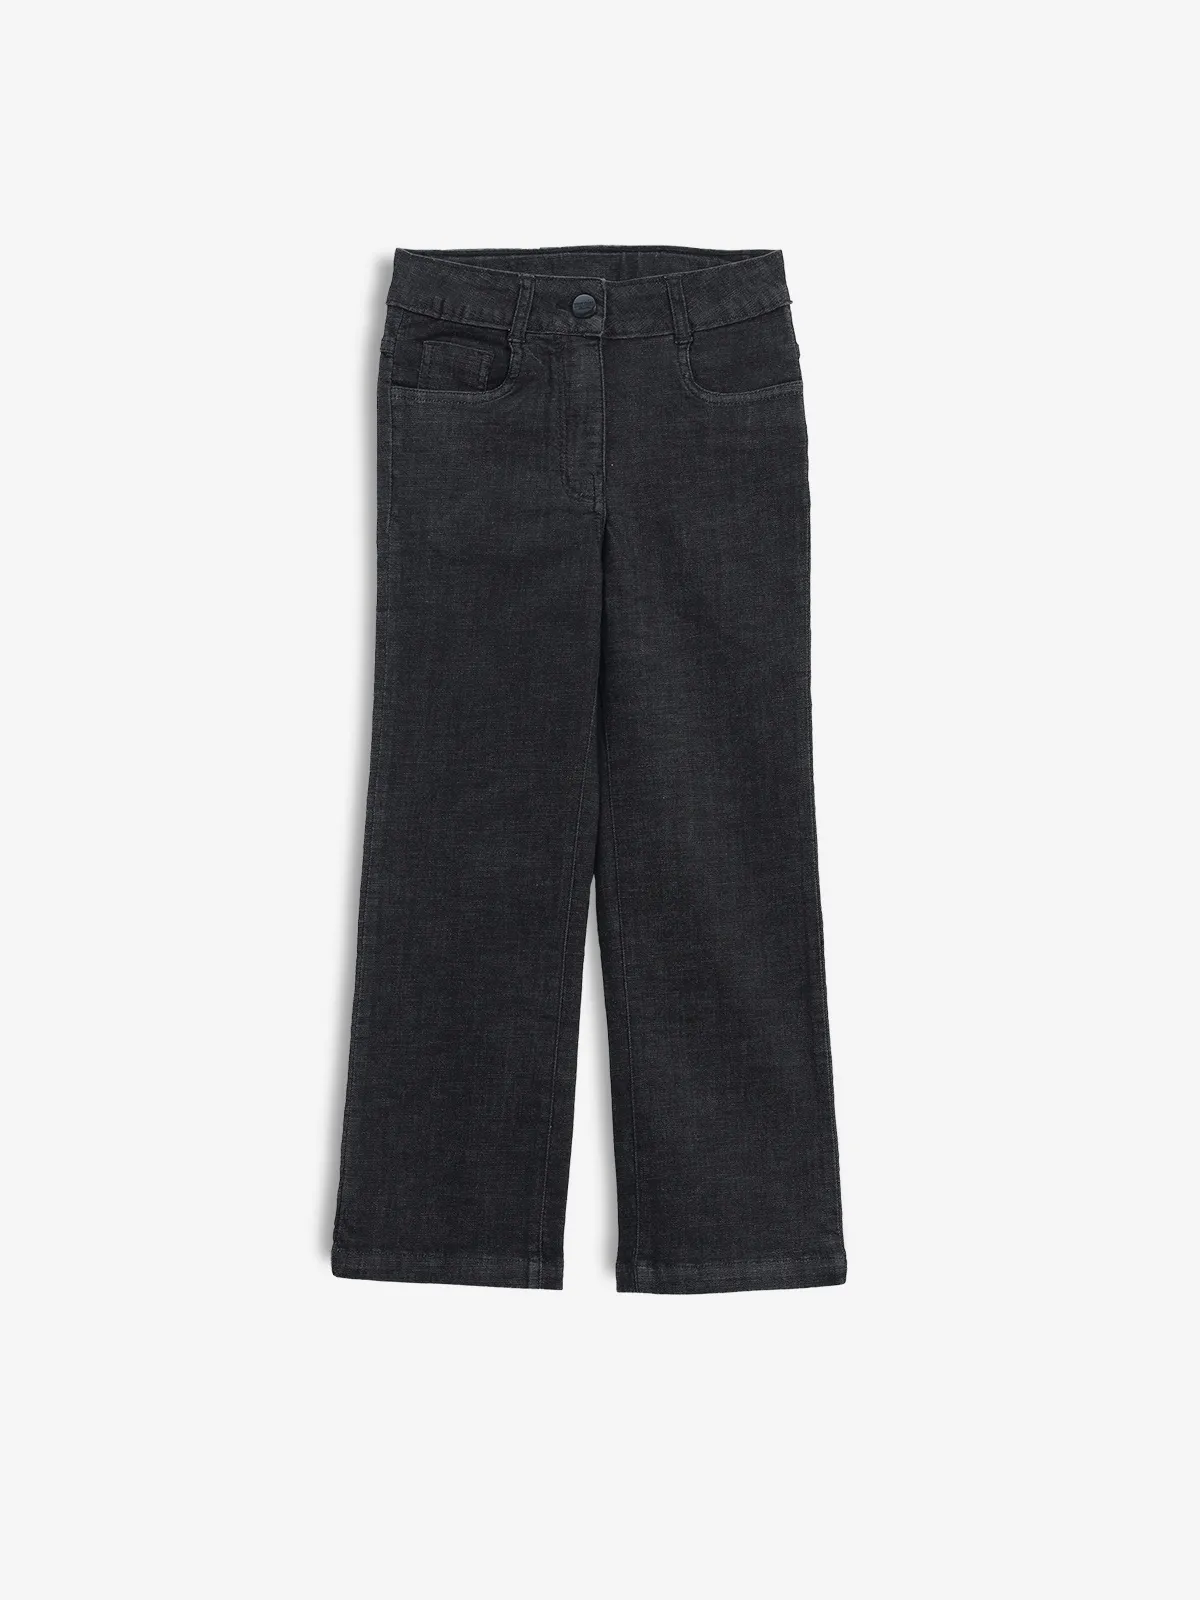 TINY GIRL solid black casual jeans